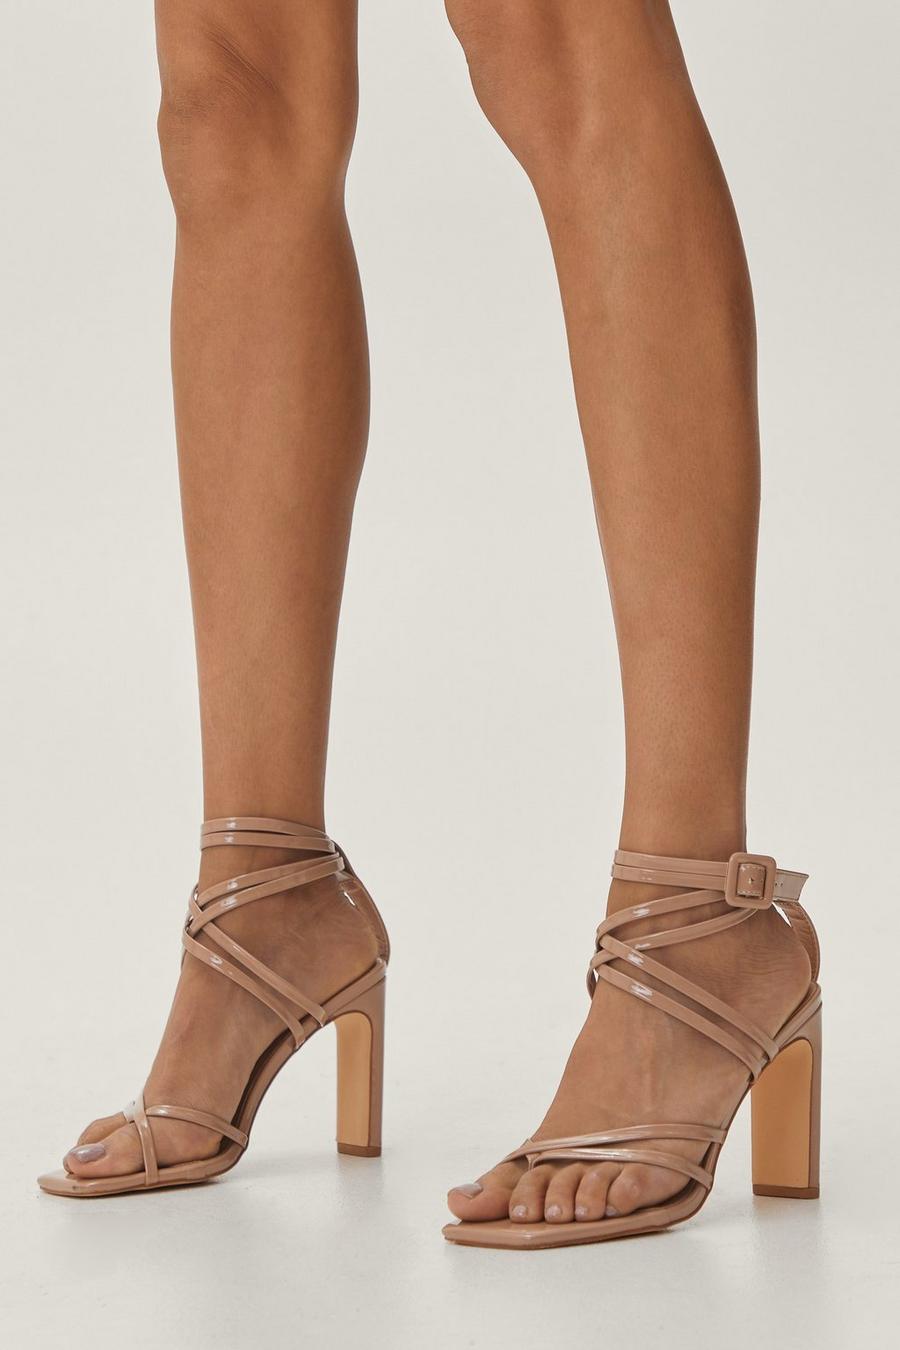 Patent Faux Leather Strappy Block Heels